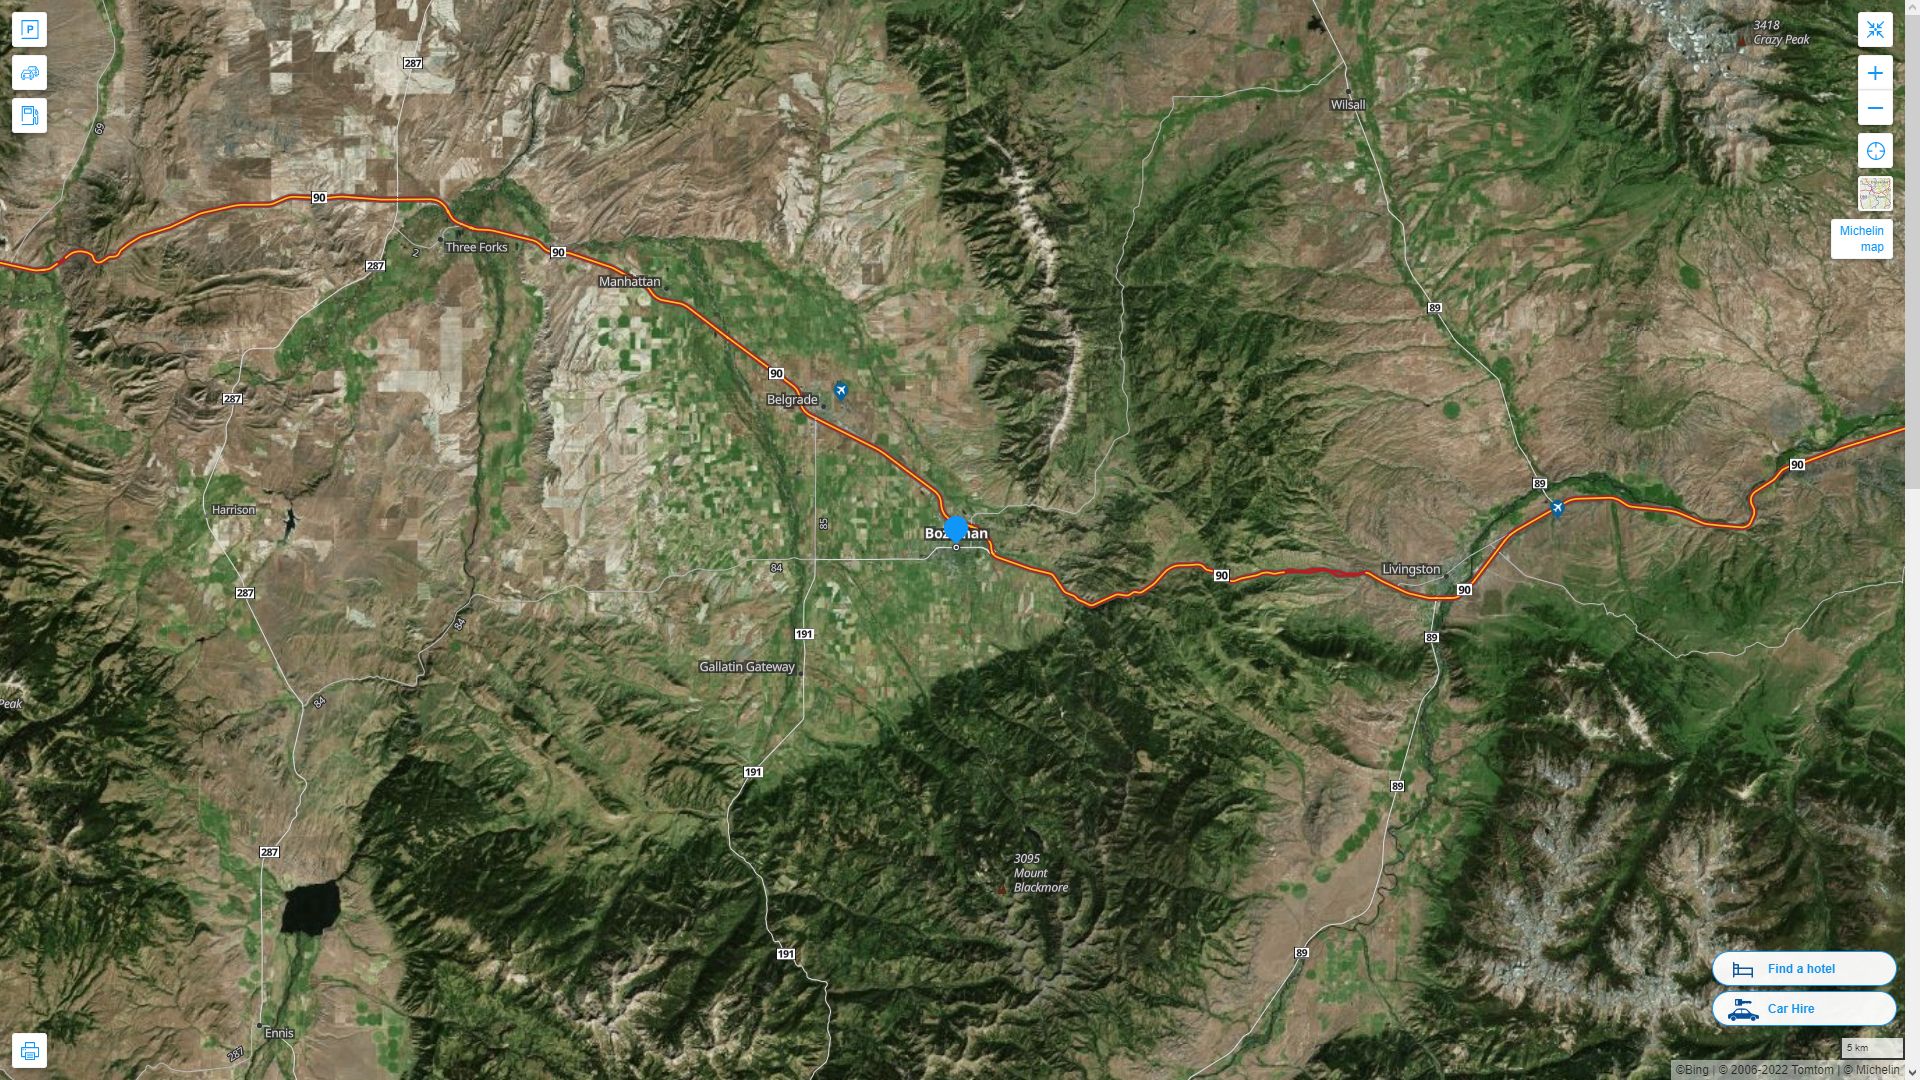 Bozeman Montana Highway and Road Map with Satellite View